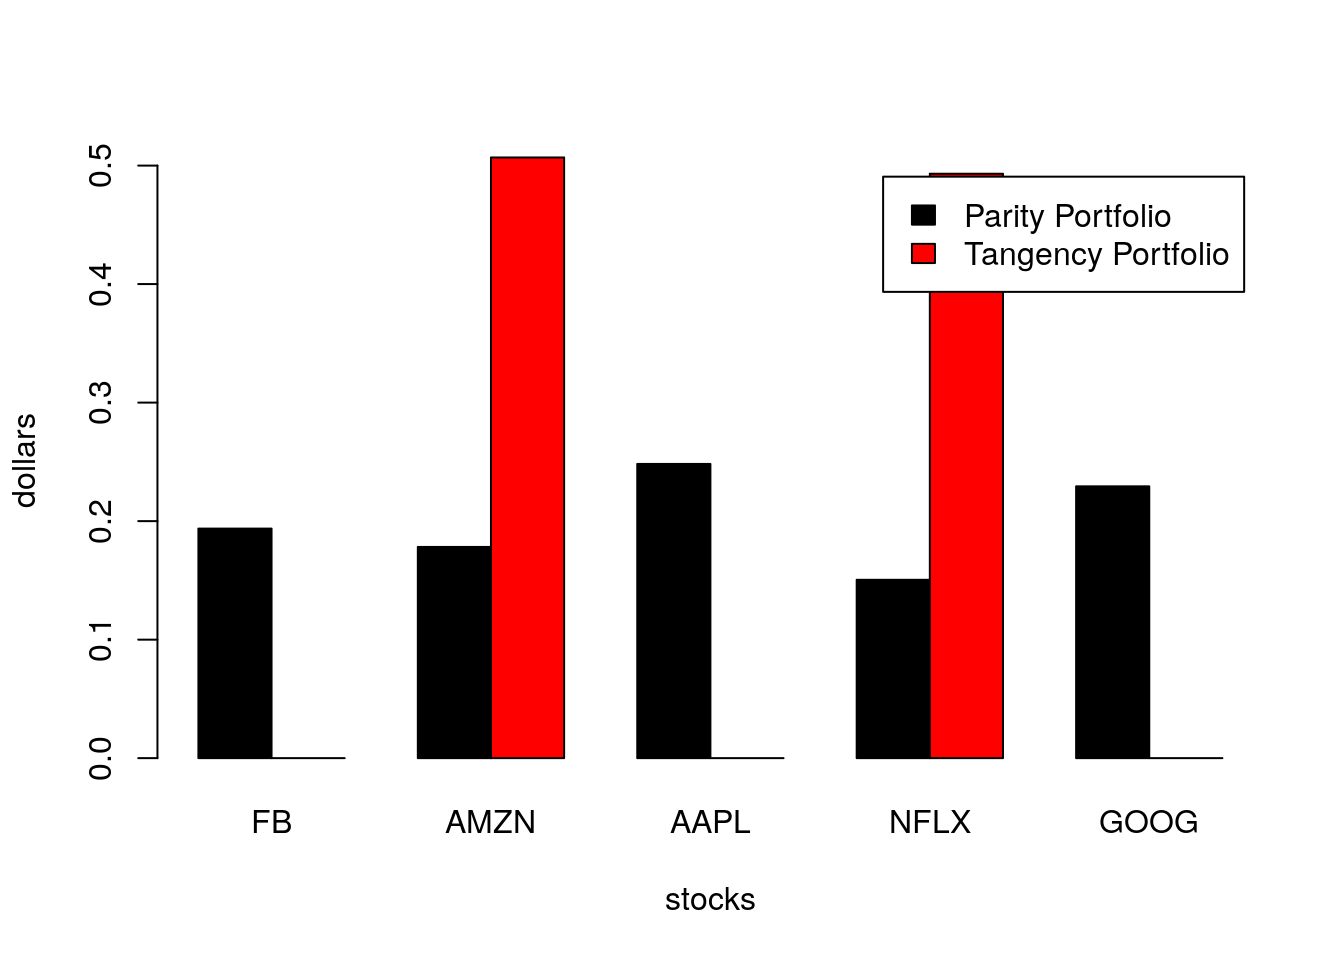 Portfolio weights for parity and tangency FAANG portfolios considering returns from 2018.